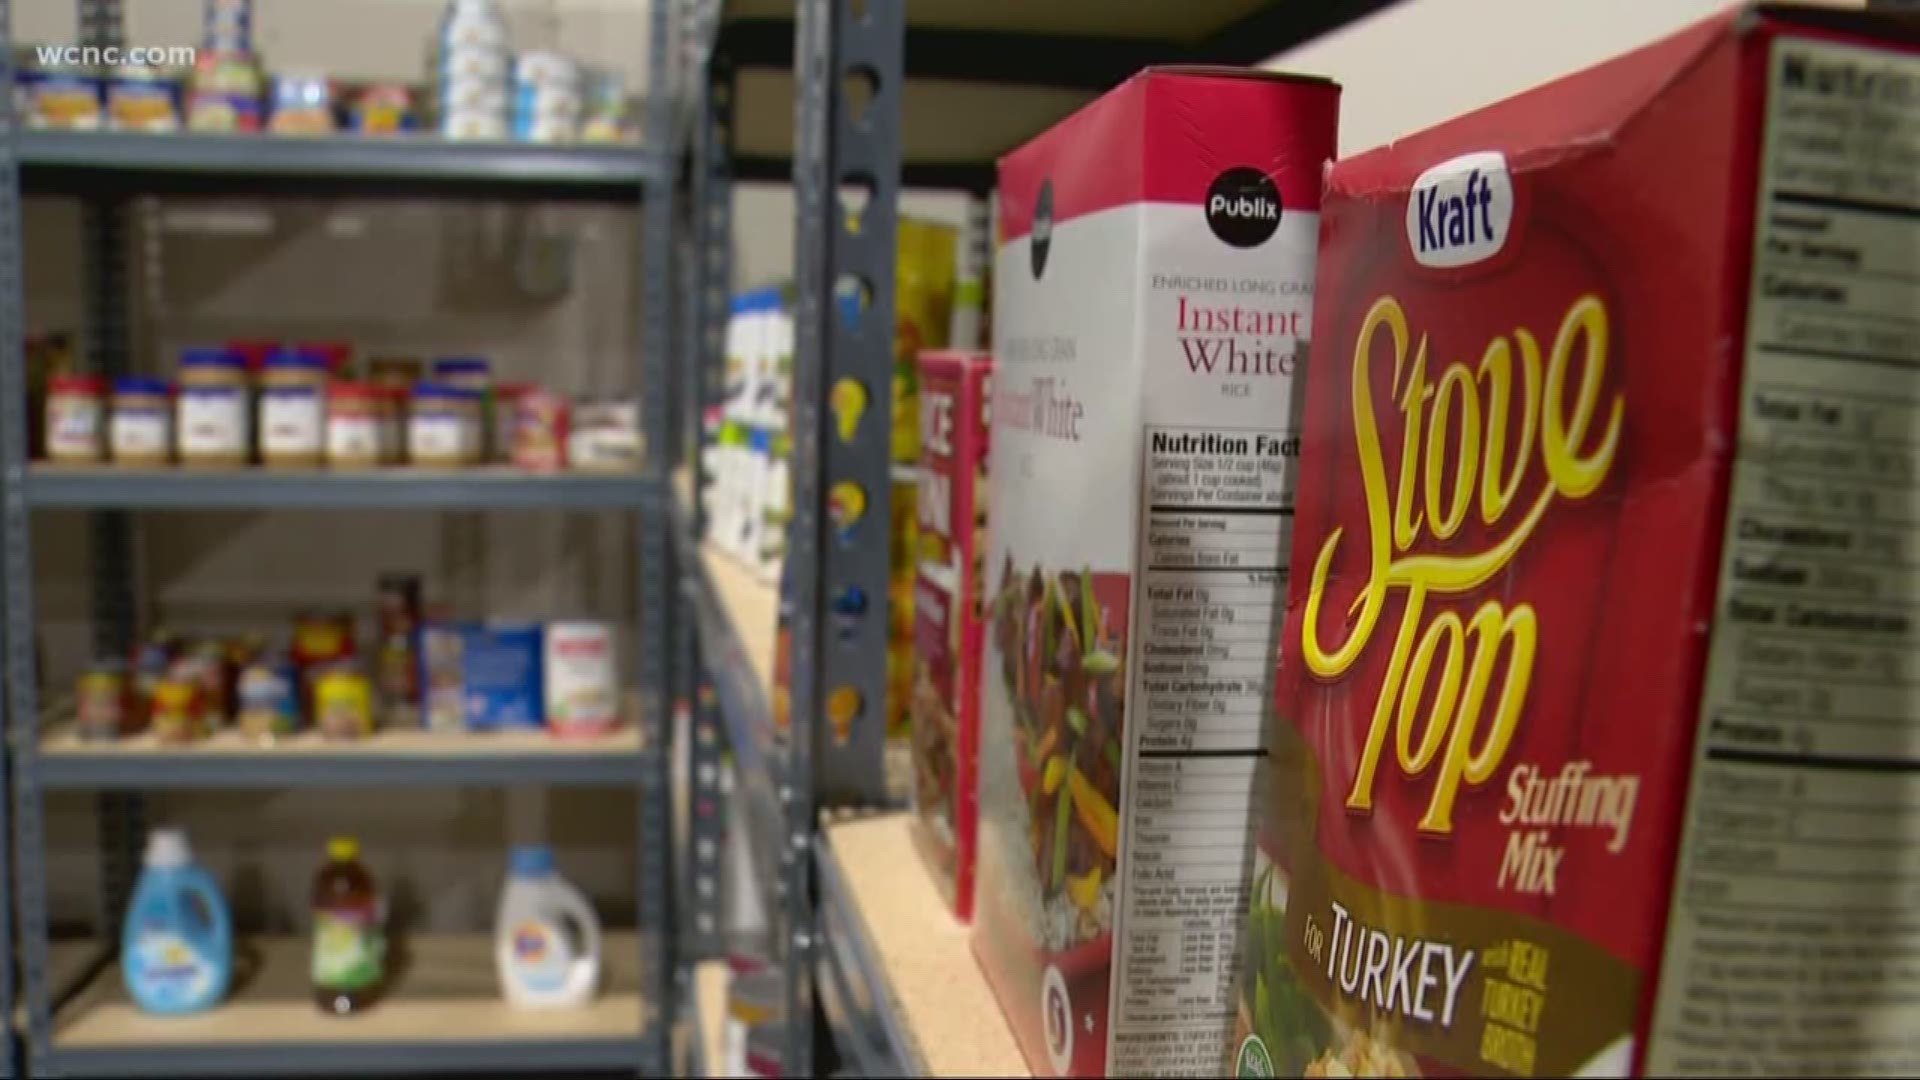 Nearly 40 million people depend on food stamps. If this shutdown lasts until March, their benefits could be in jeopardy.